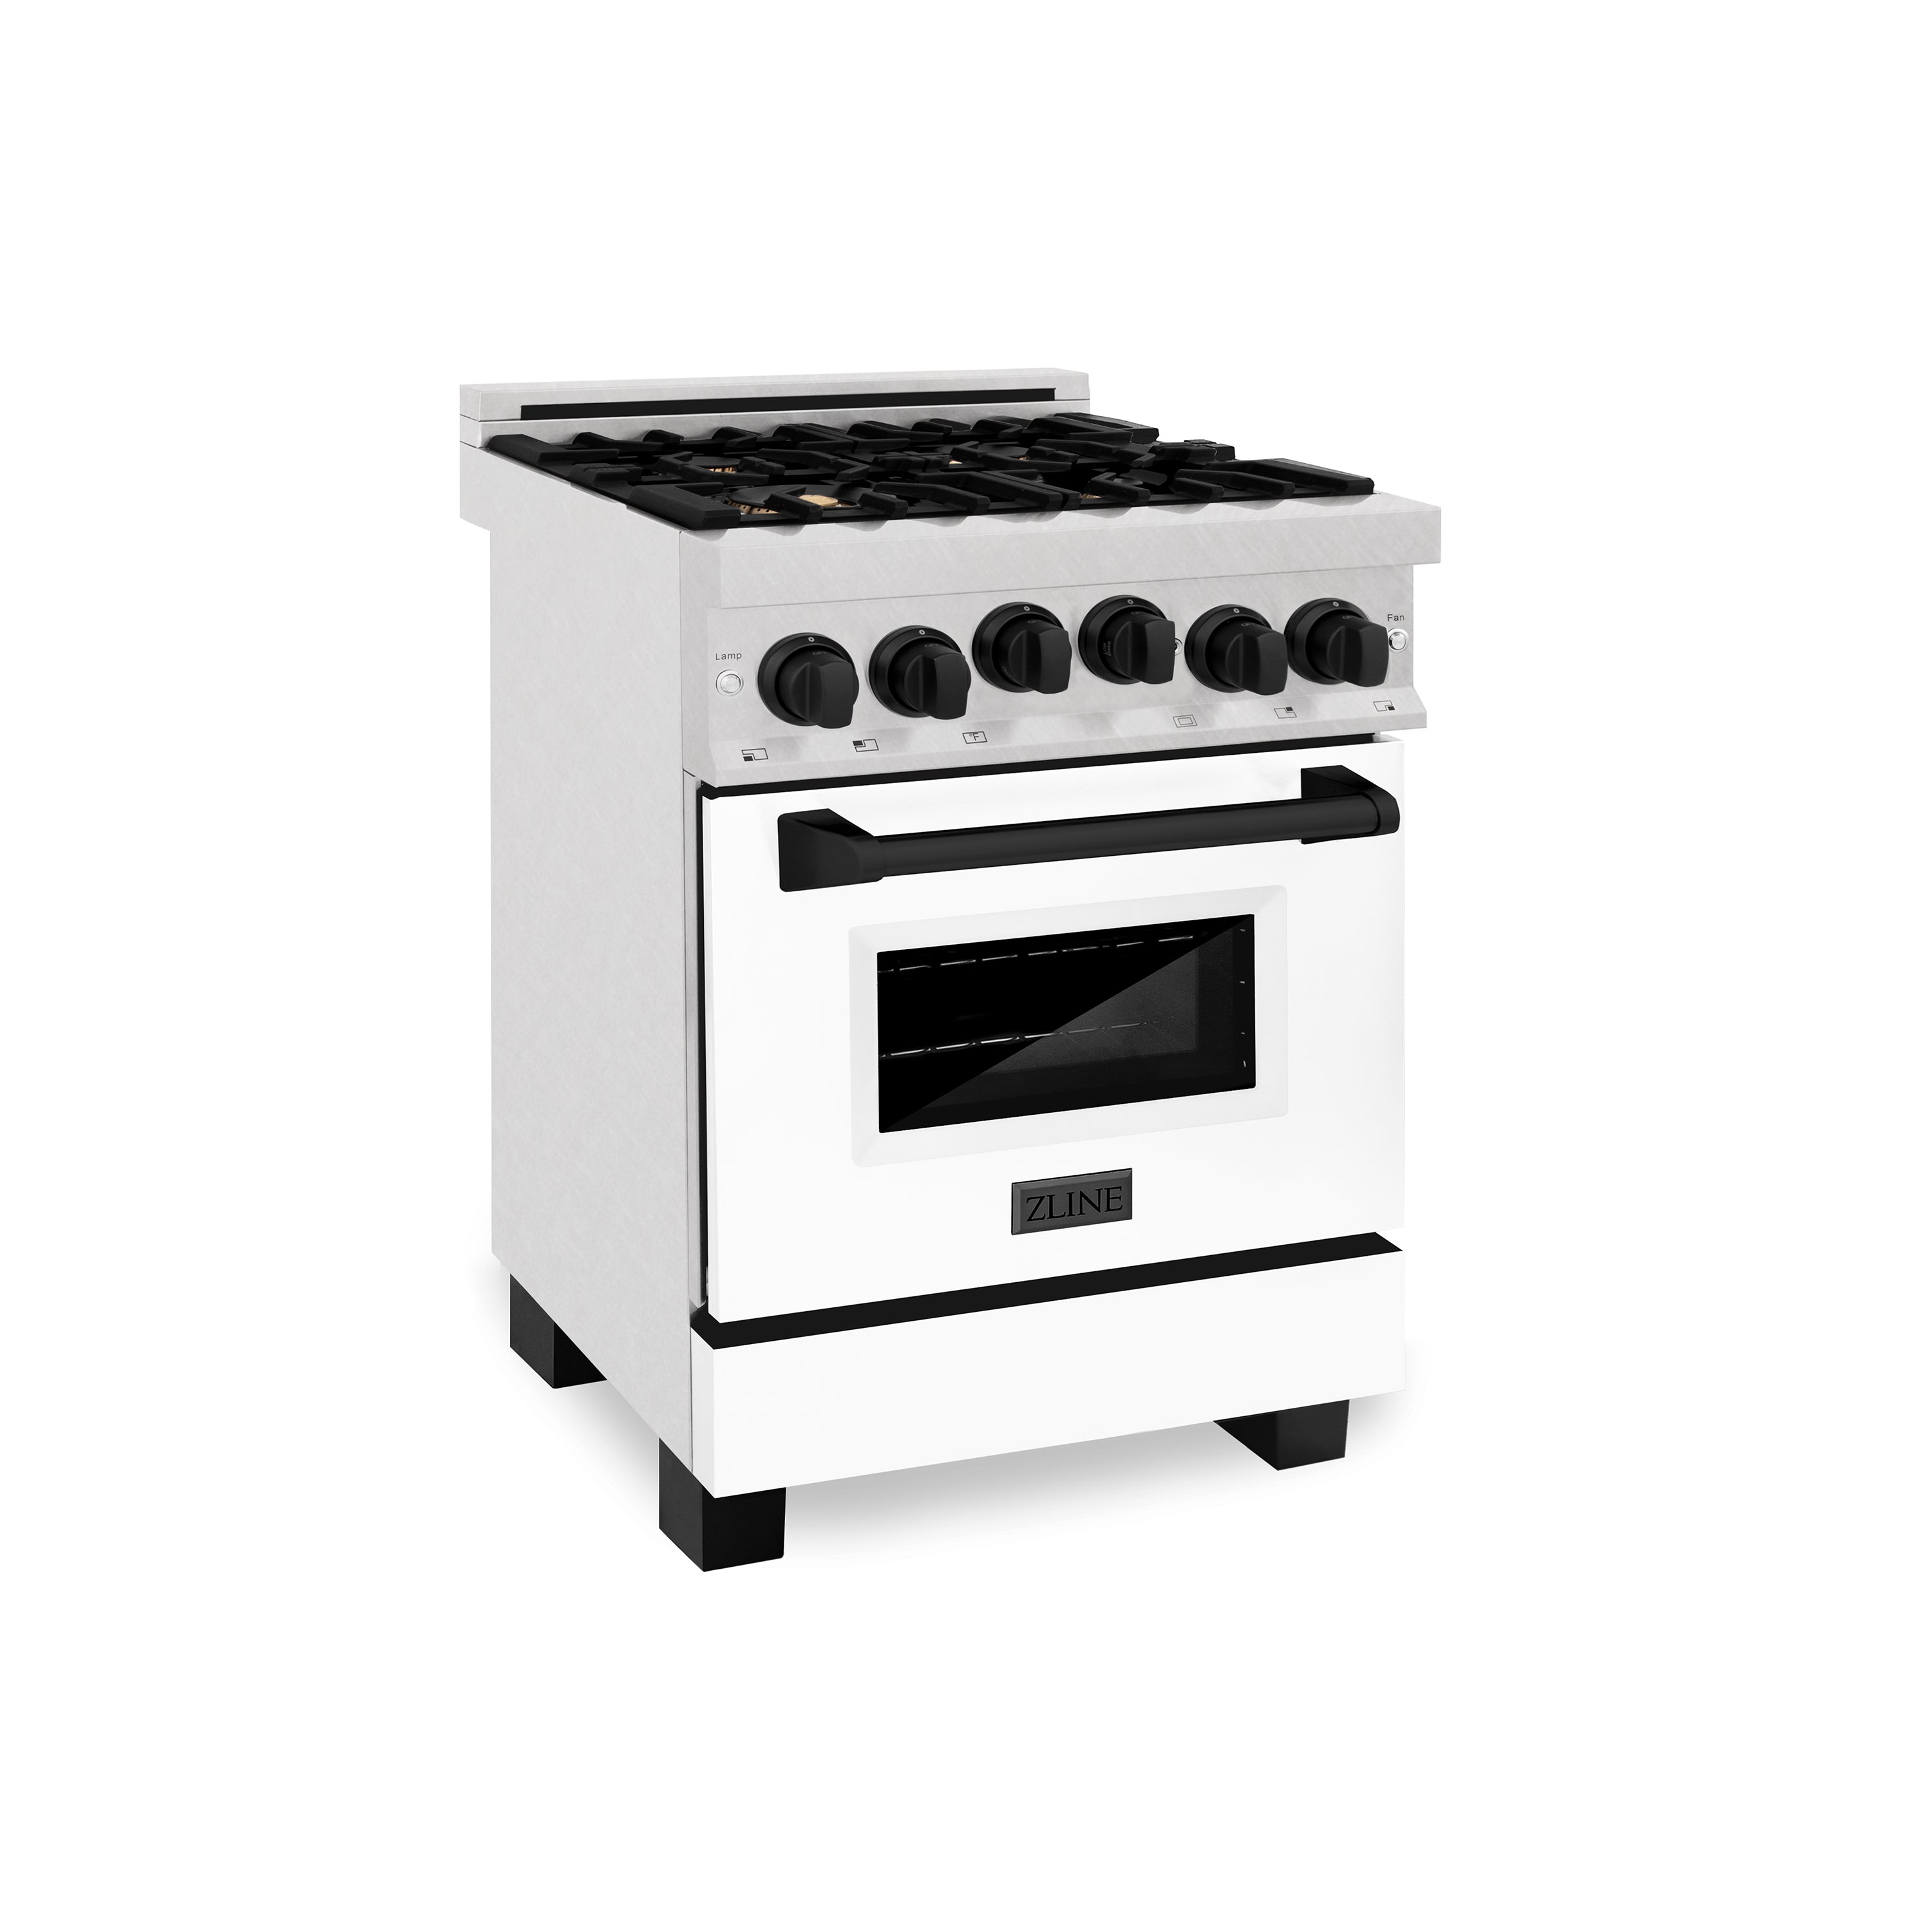 ZLINE Autograph Edition 24" 2.8 cu. ft. Range with Gas Stove and Gas Oven in Fingerprint Resistant Stainless Steel with White Matte Door and Accents (RGSZ-WM-24-MB)